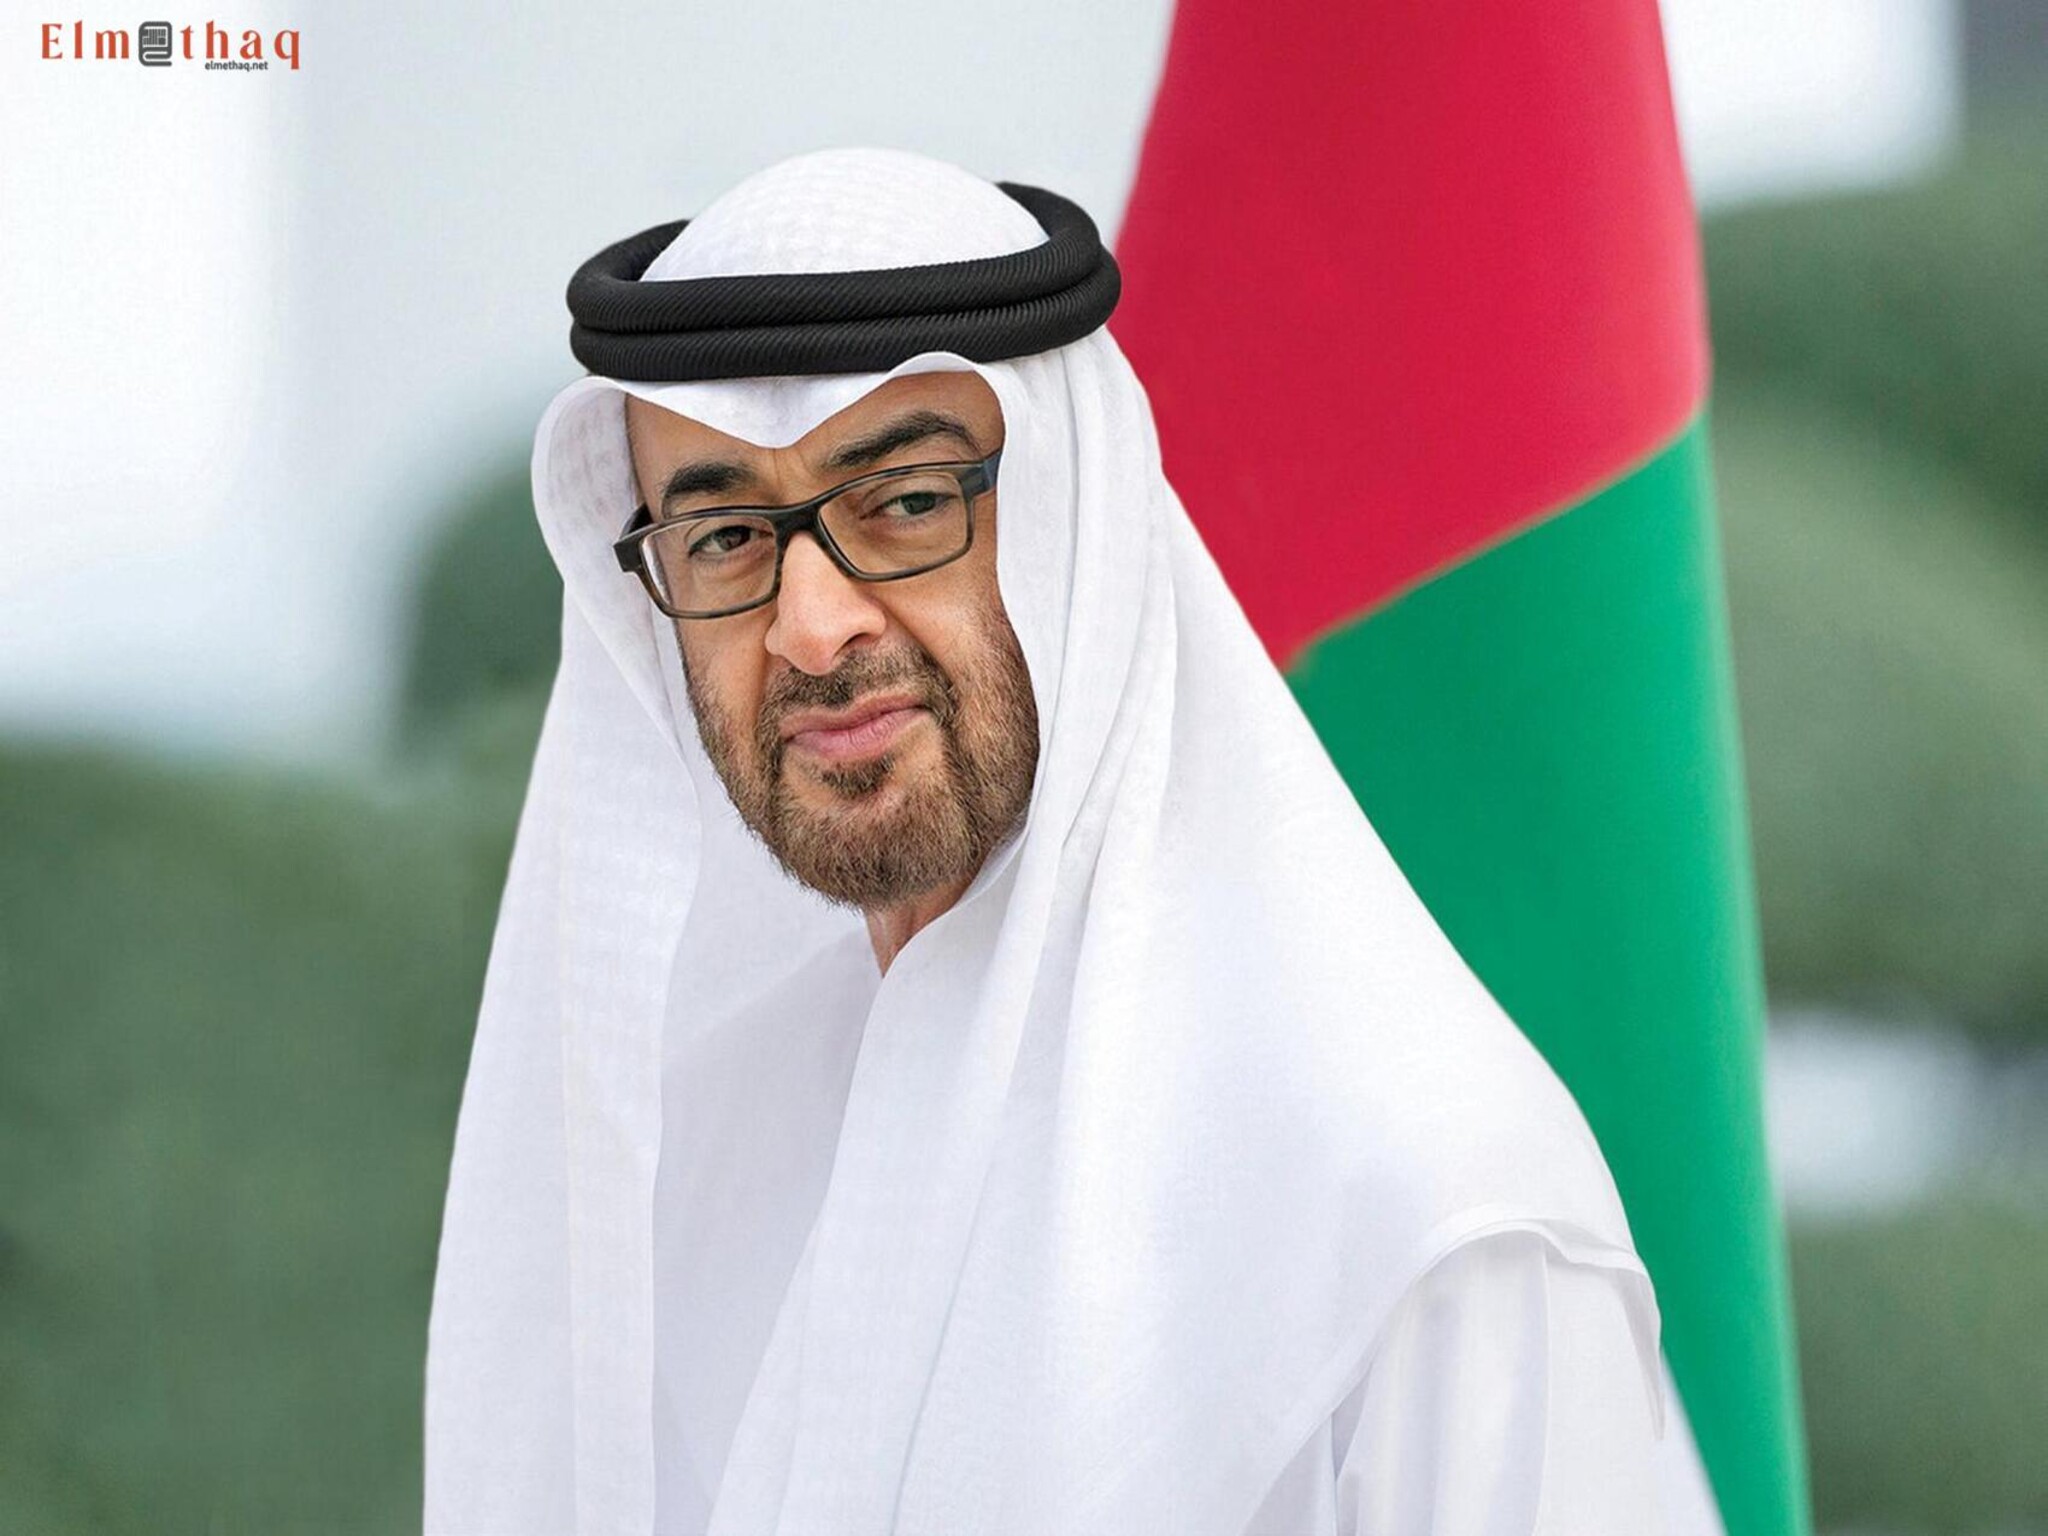 UAE introduces $15 million in aid for Kenyan flood relief